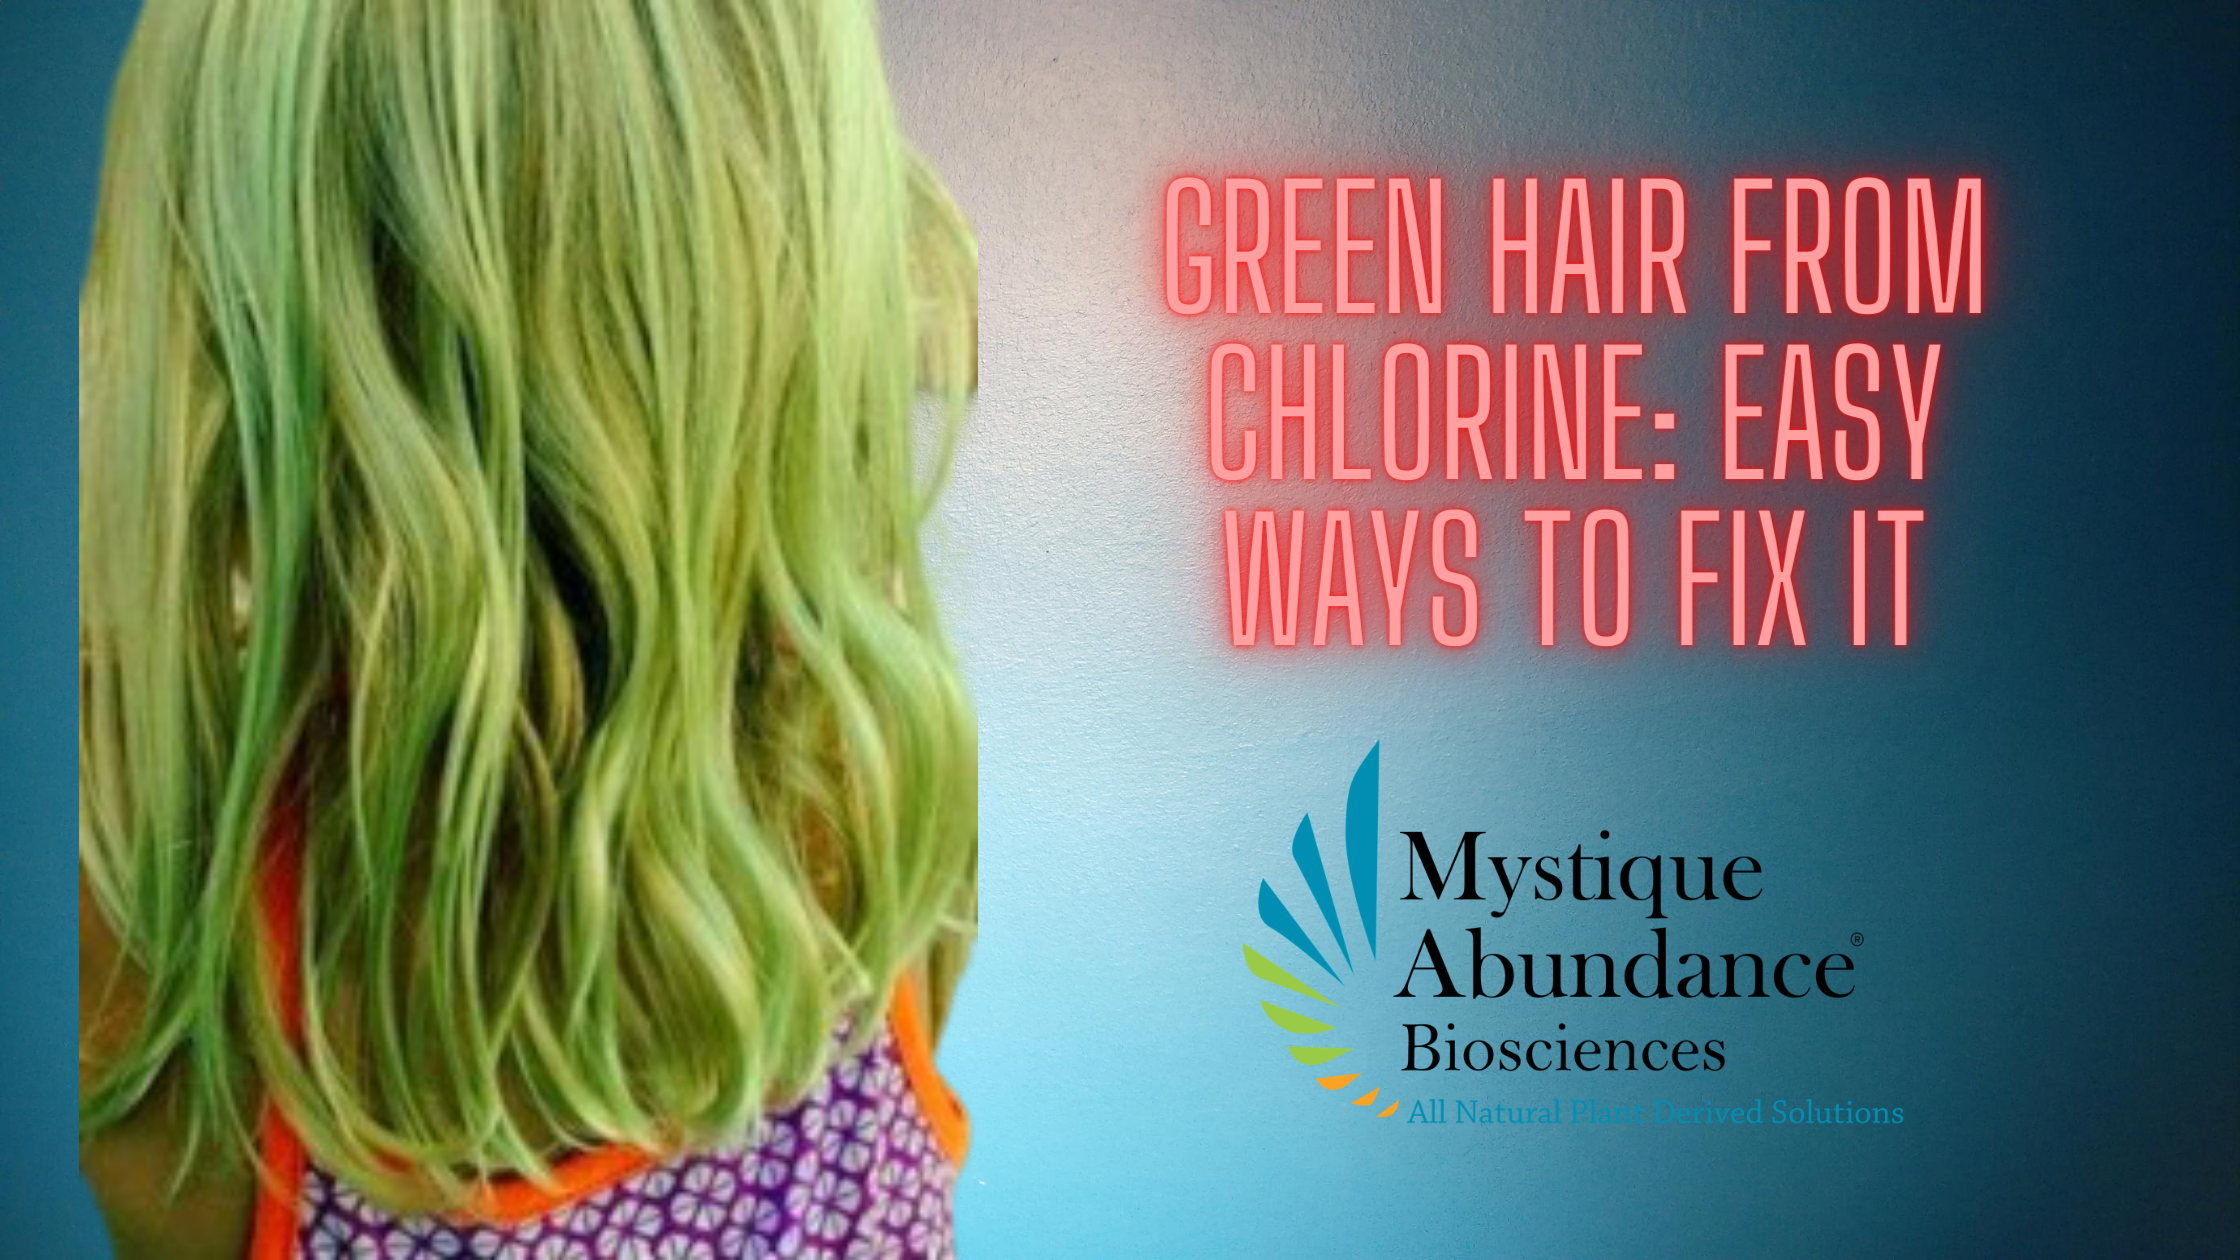 Chlorine-Resistant Hair Care Tips for Blue Hair - wide 8